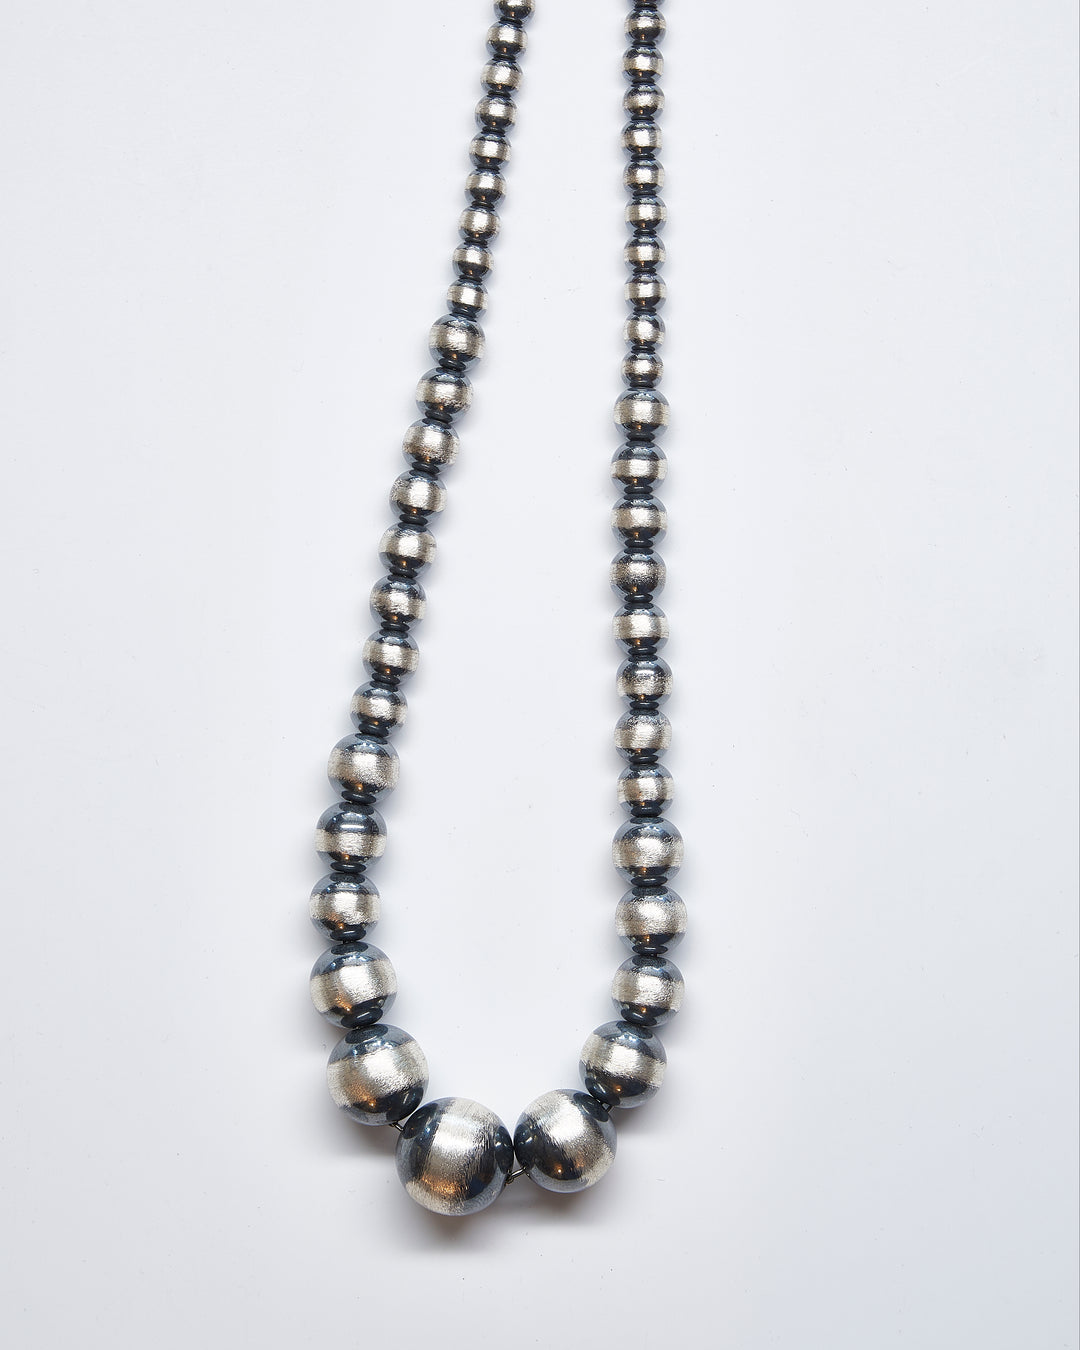 18" Graduated Oxidized Silver Beaded Necklace